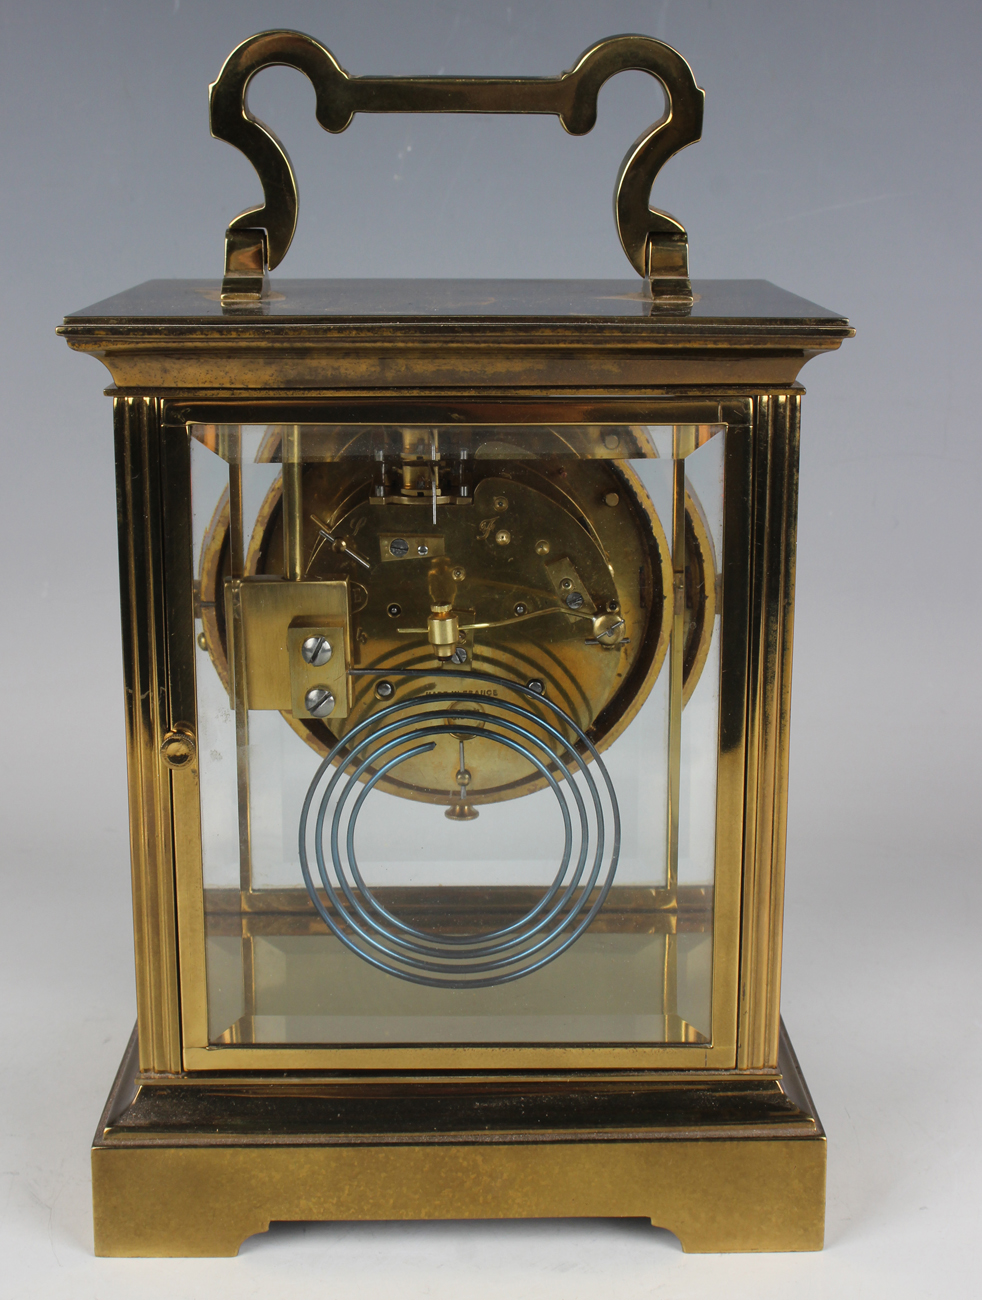 A 20th century French lacquered brass four glass mantel clock, the eight day movement with - Image 5 of 8